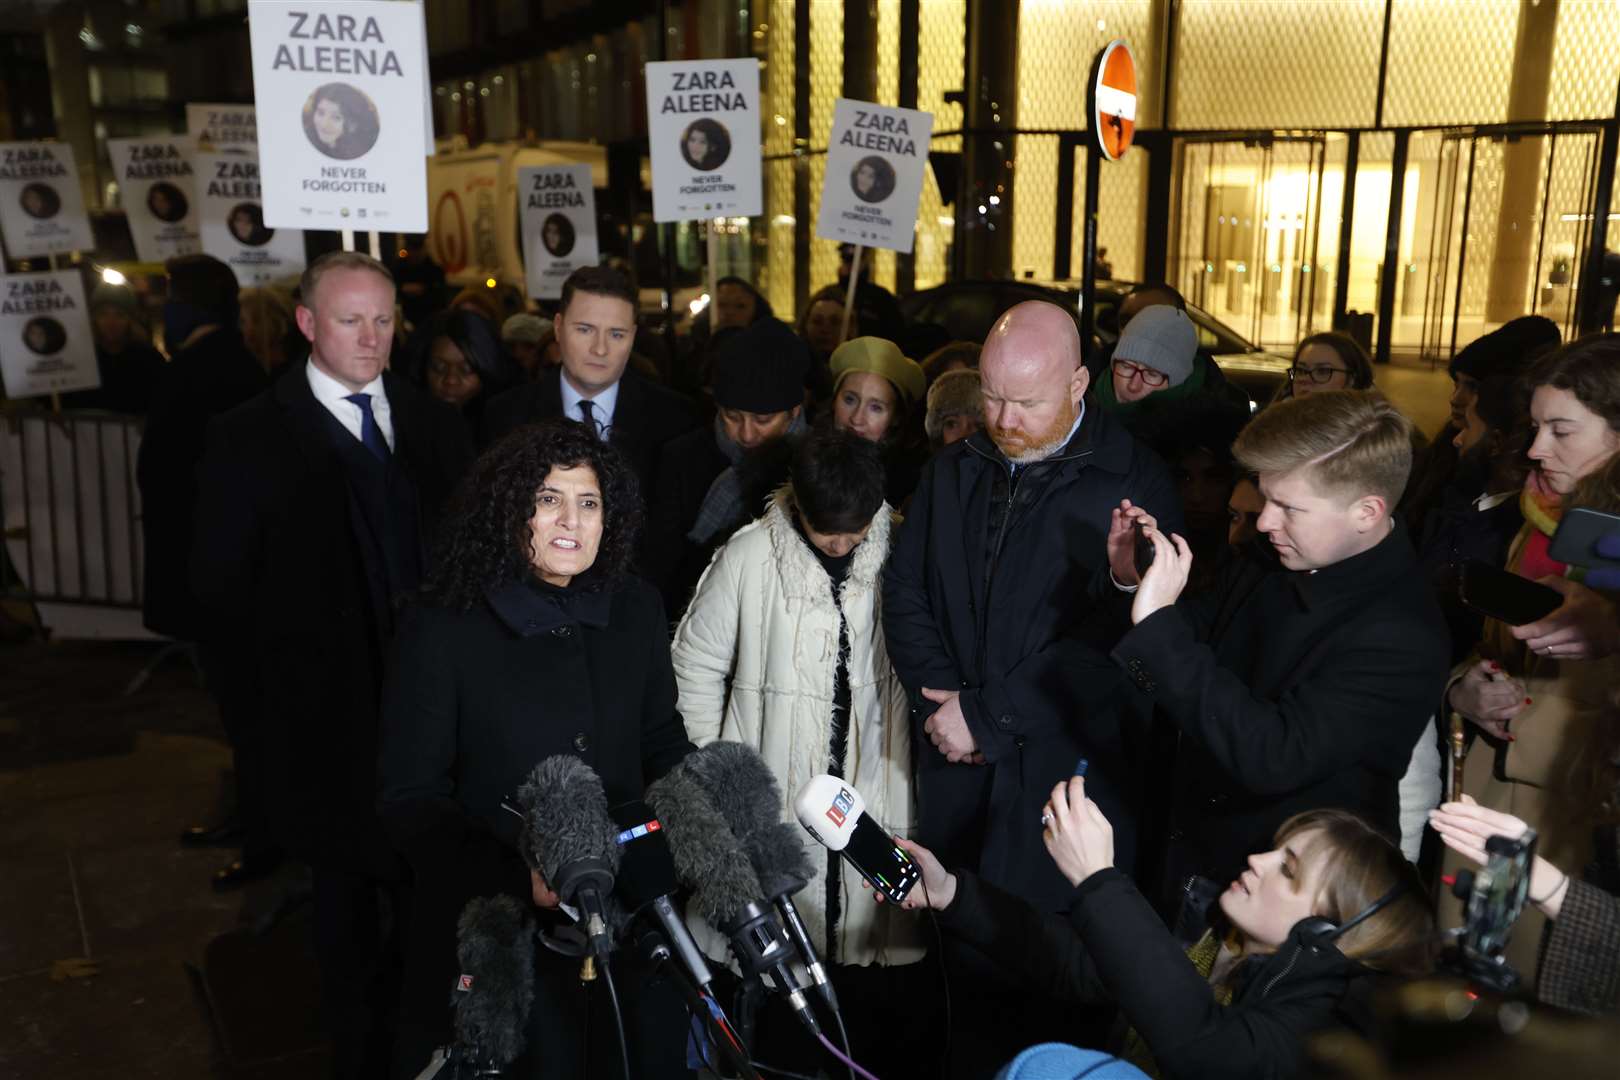 Farah Naz, Zara Aleena’s aunt, reads a statement outside the Old Bailey in London after Jordan McSweeney is sentenced to life (PA)